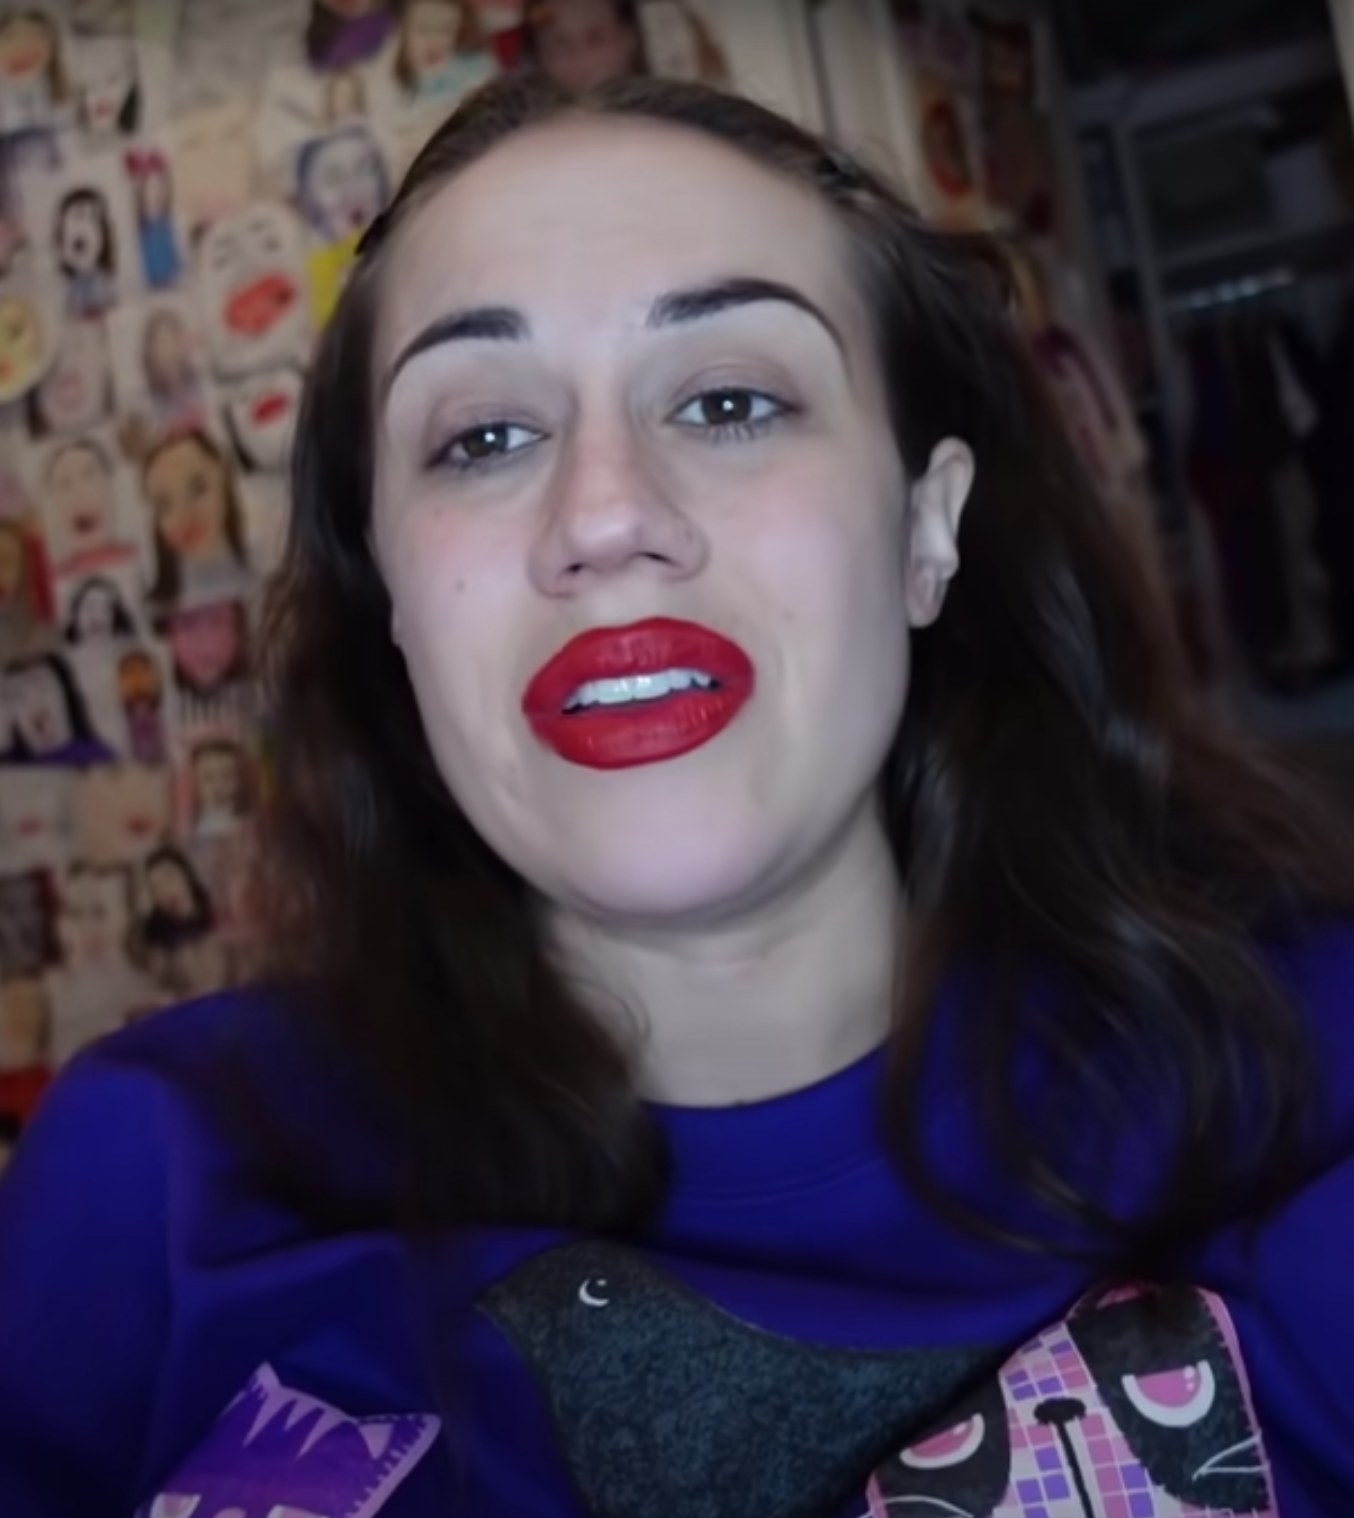 Colleen Ballinger as Miranda Sings in a 2021 YouTube video discussing Harry Styles